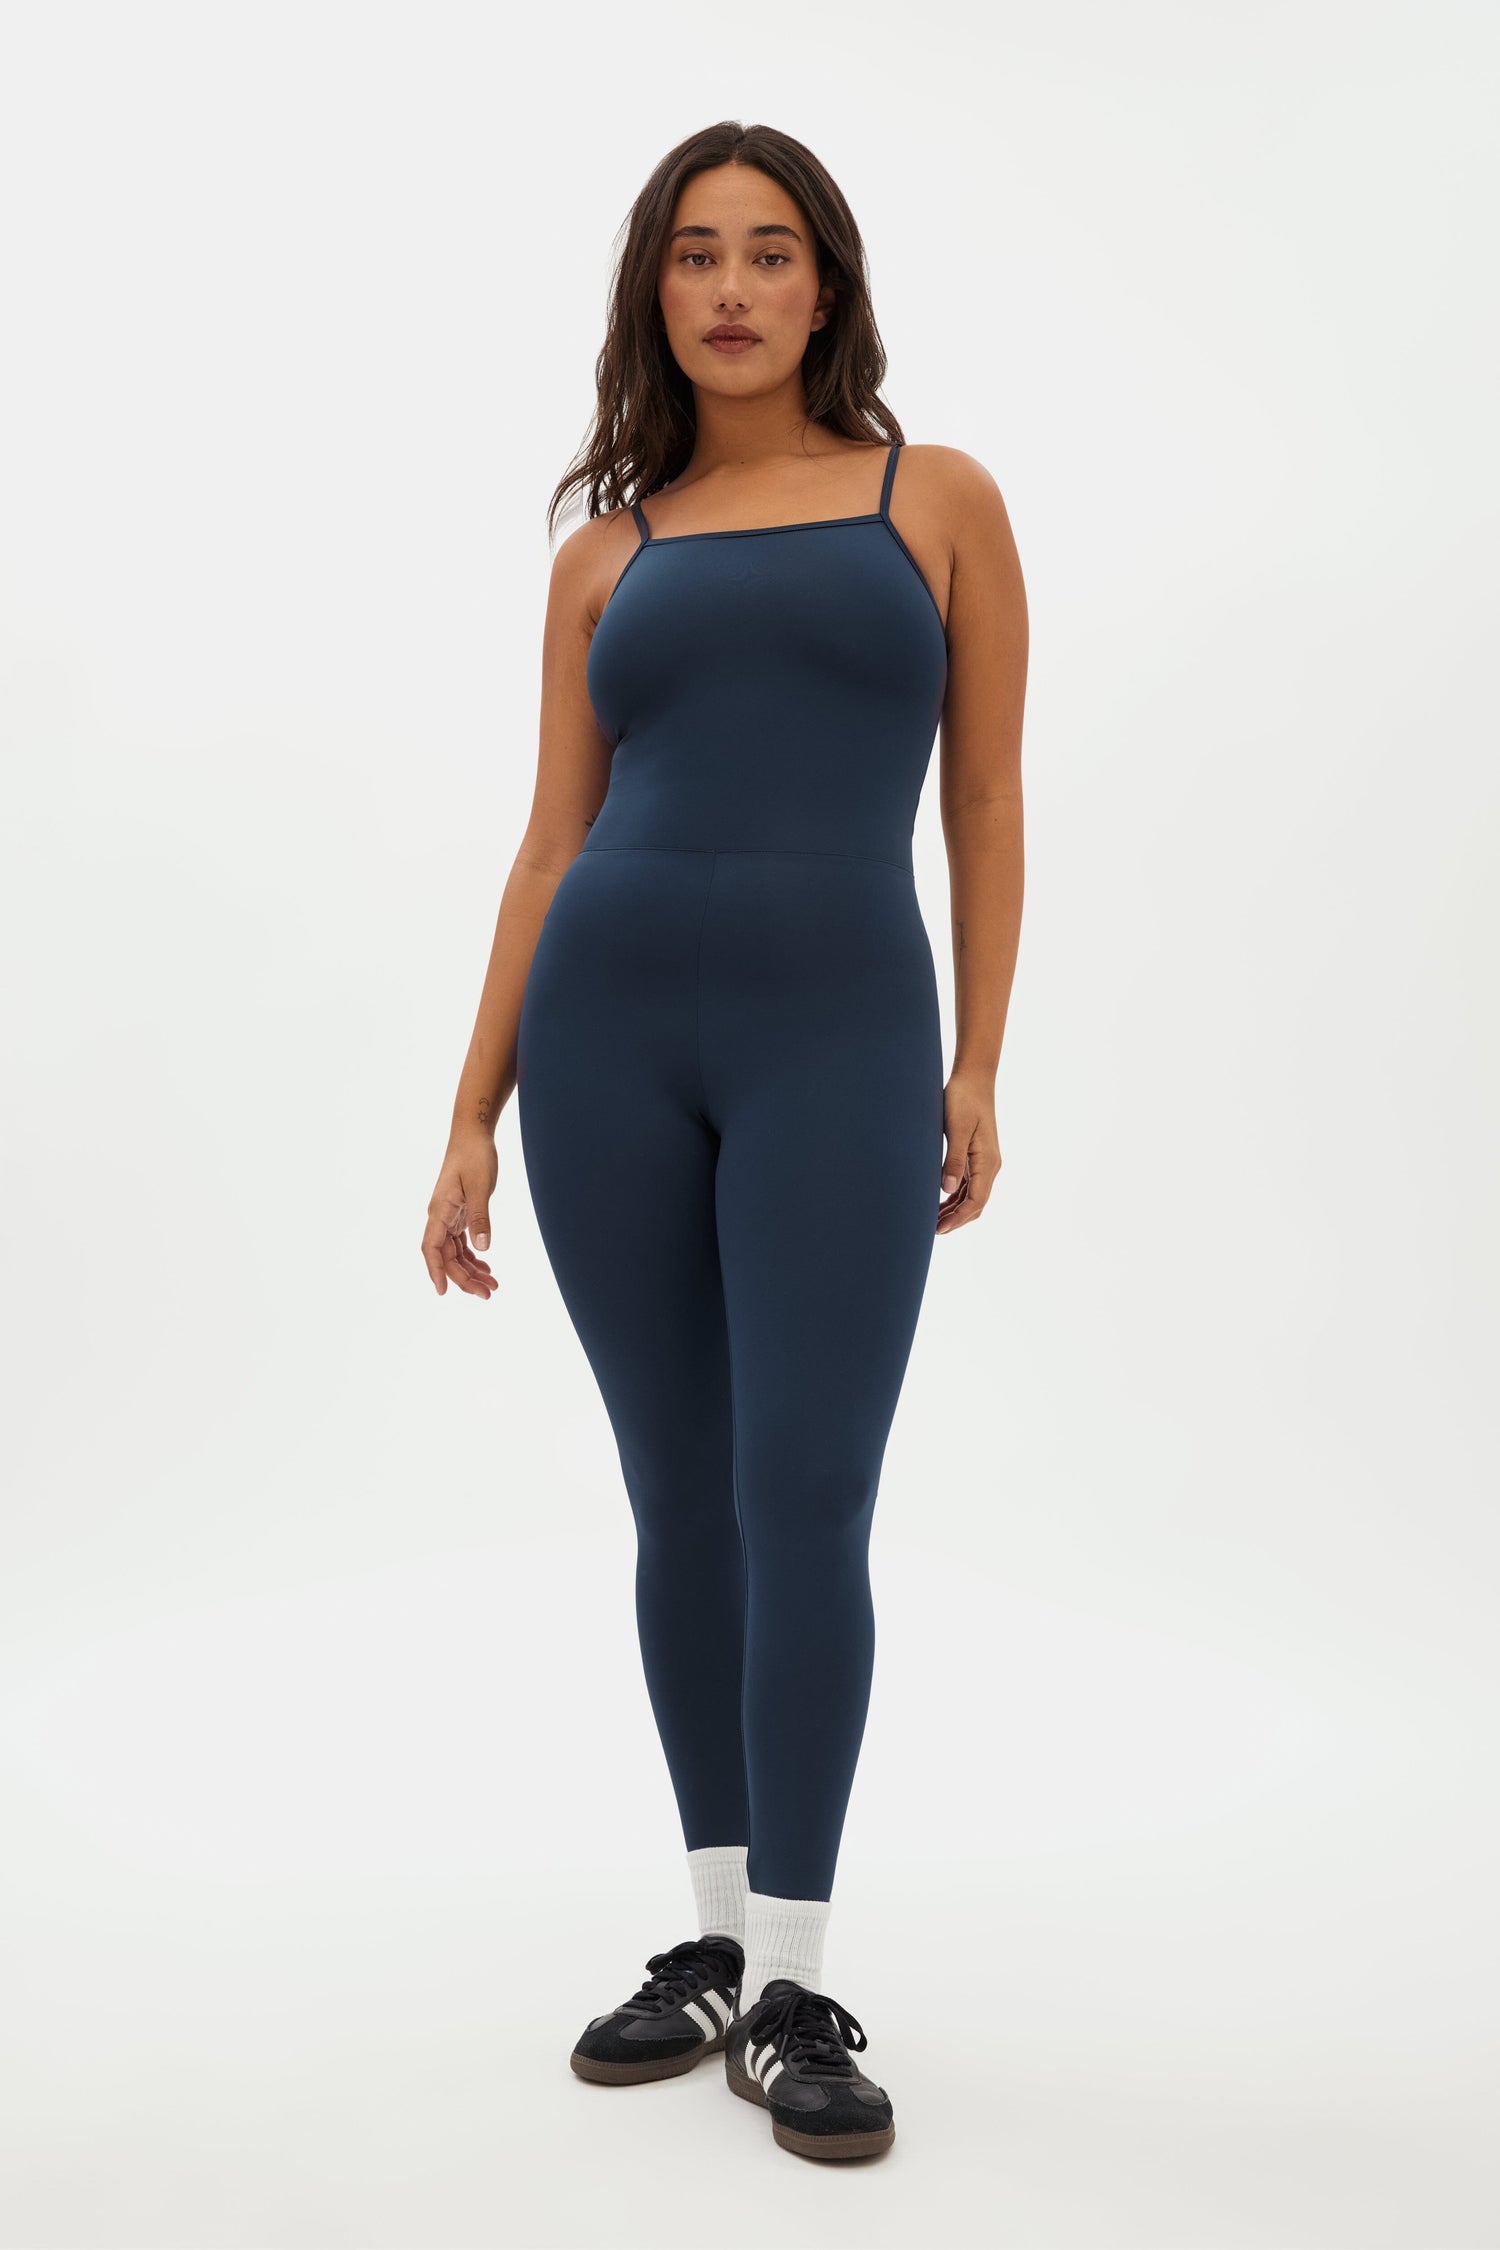 Girlfriend Collective Training & Yoga Unitard - Made from recycled plastic bottles Midnight Onepieces